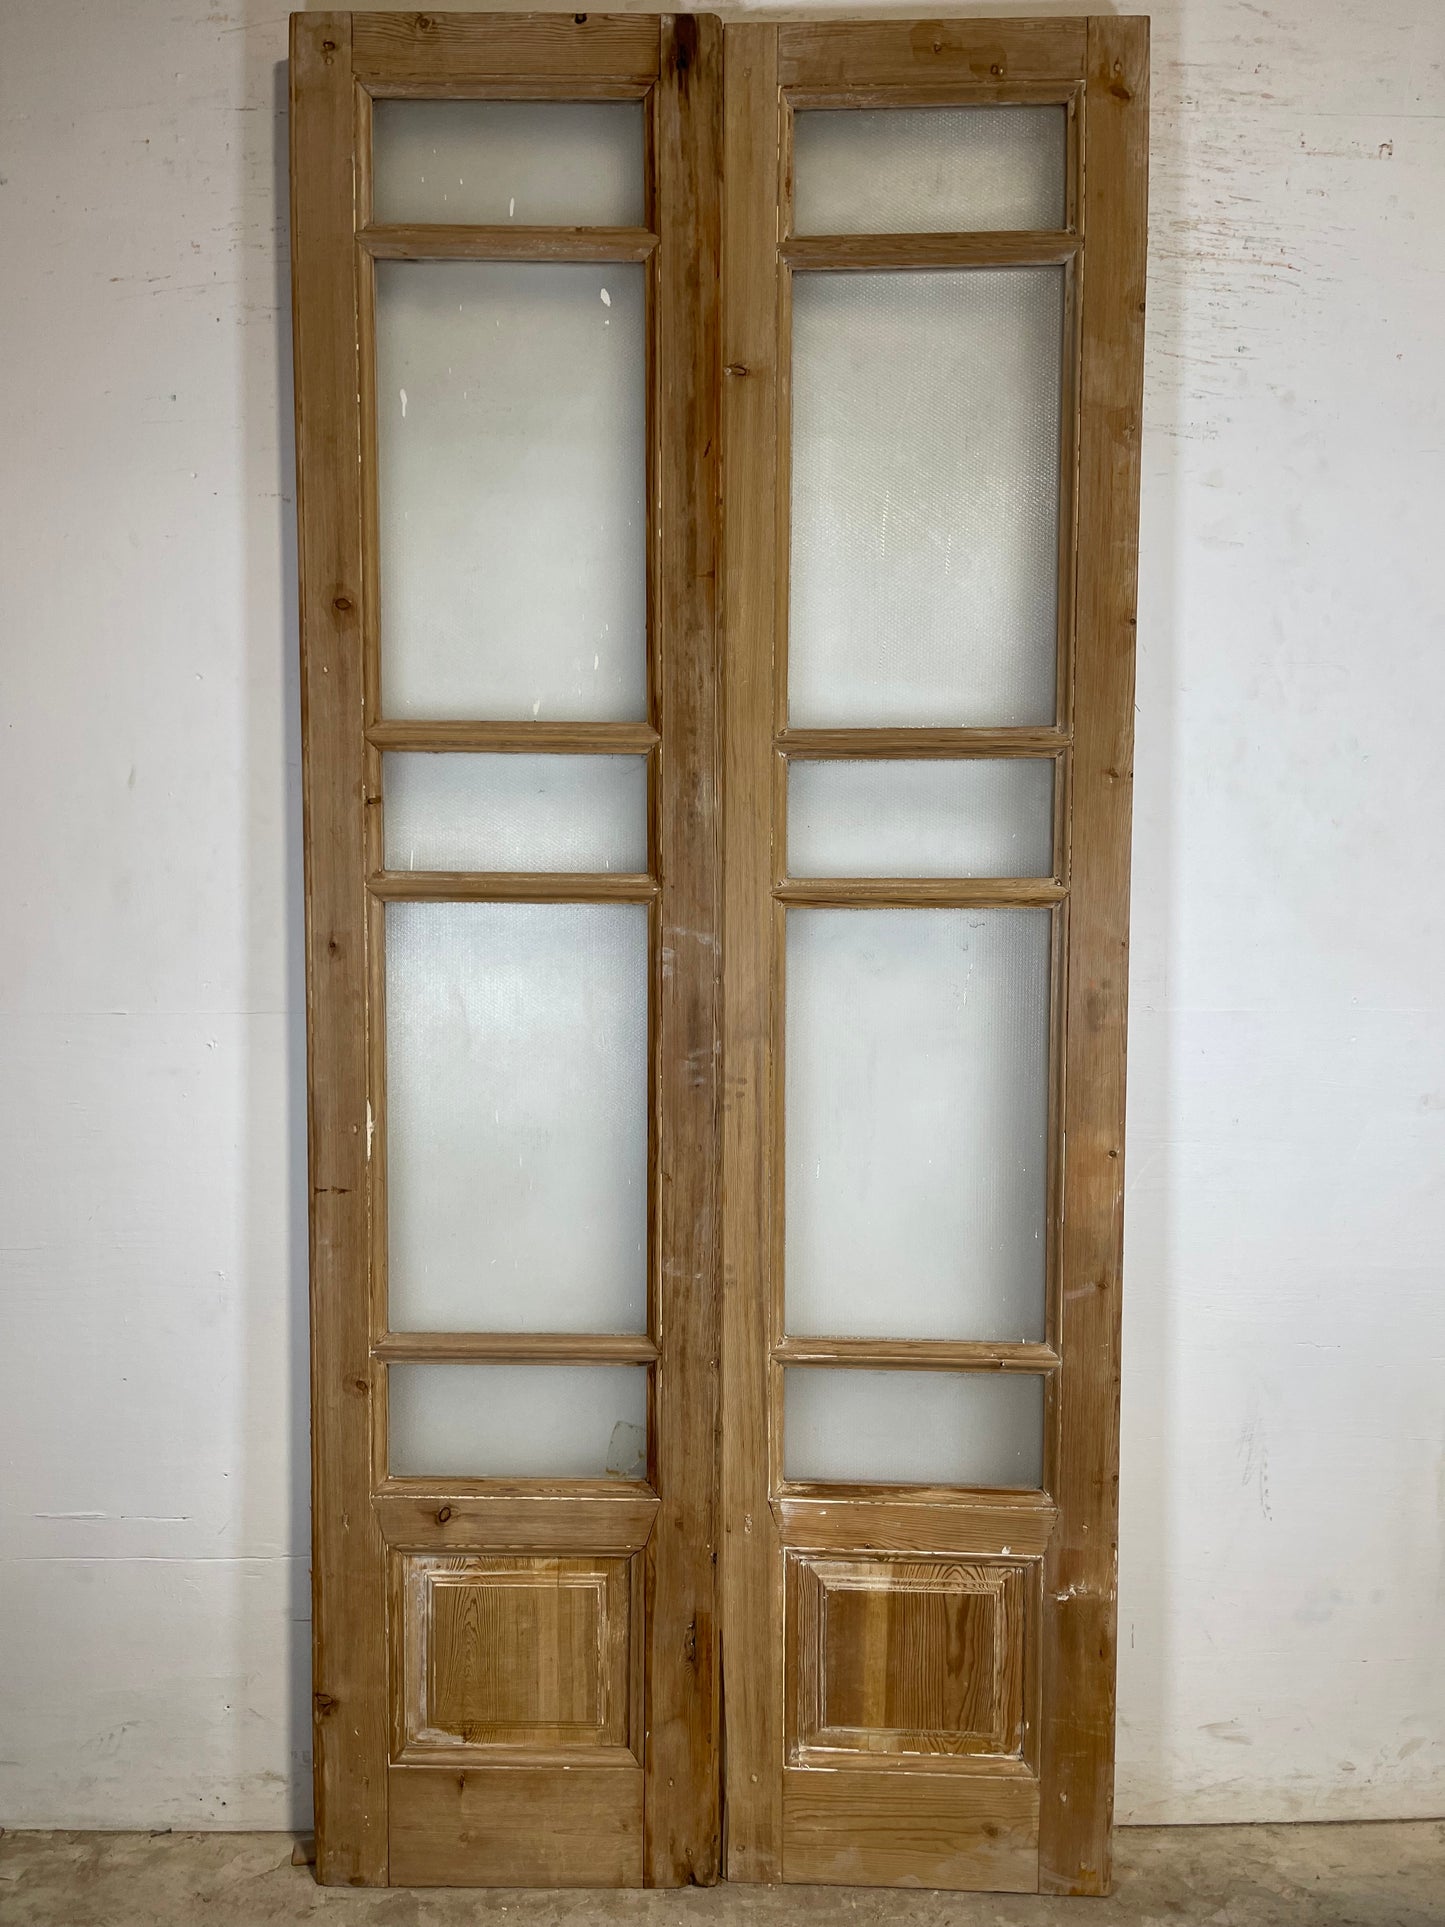 Antique French Panel Doors with glass  (99.25x44)  K324